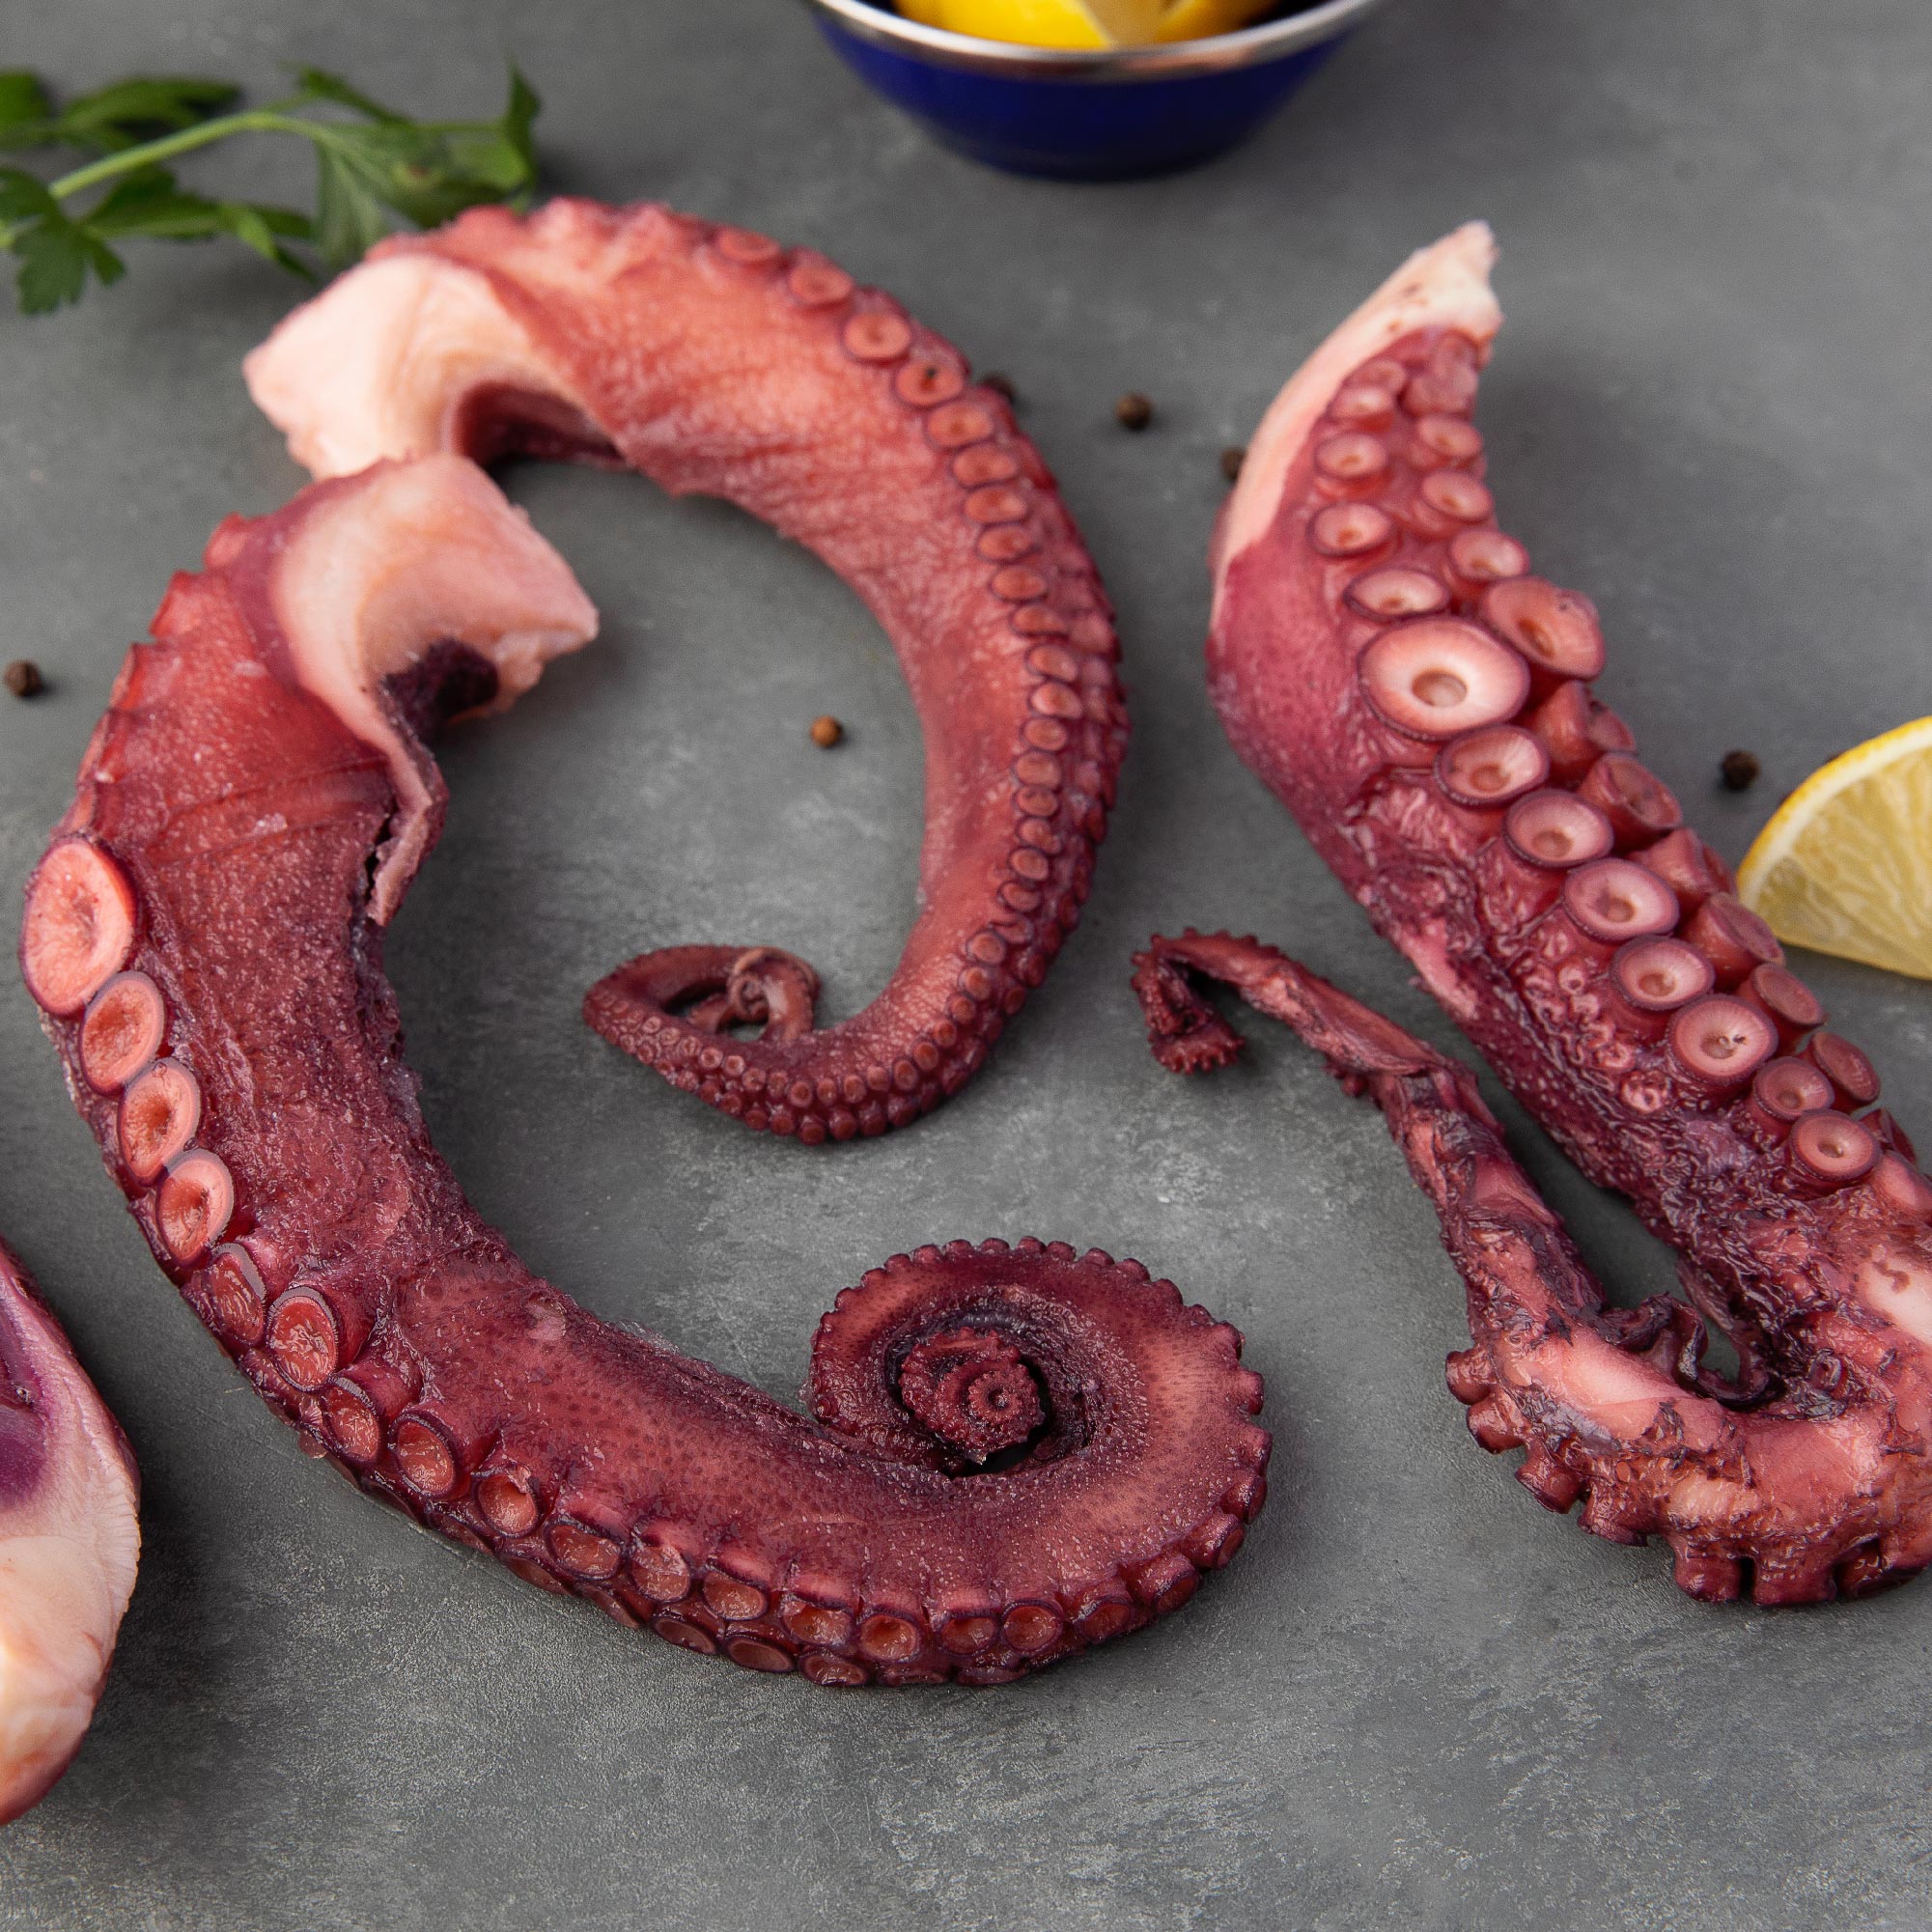 Octopus Tentacles For Sale